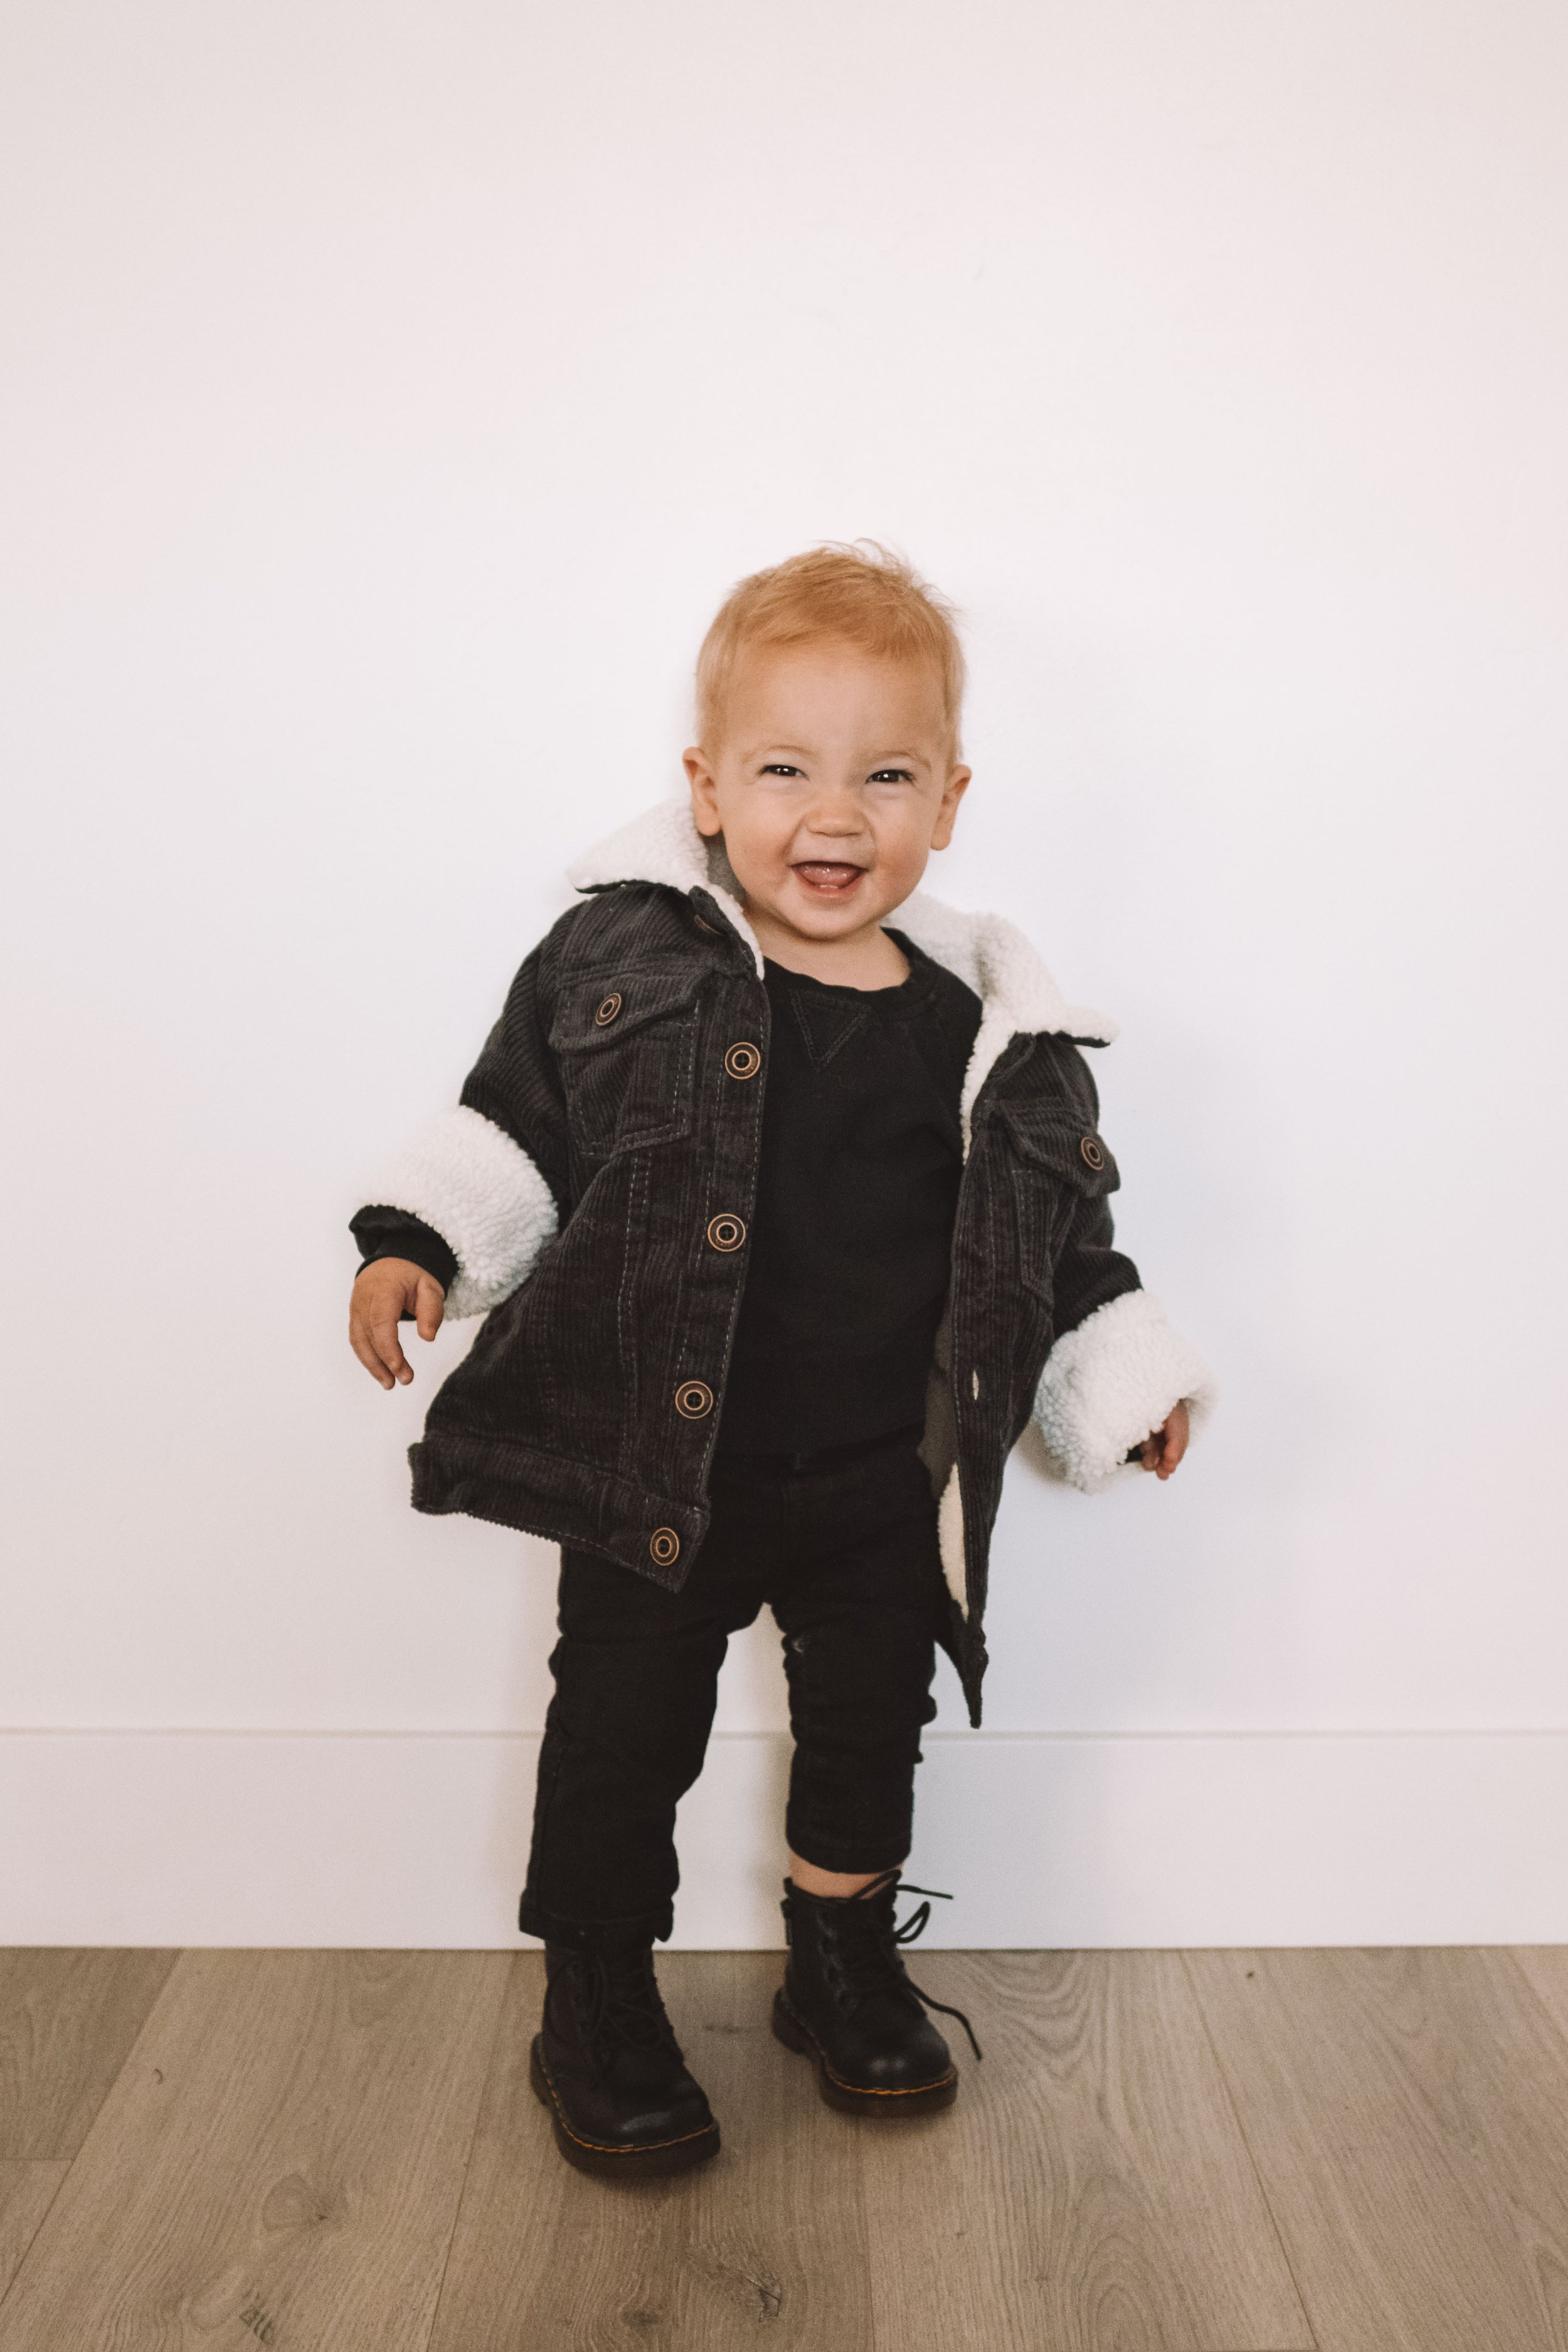 Baby Corduroy Jacket from Amazon - Mommy and Me Winter Outfits